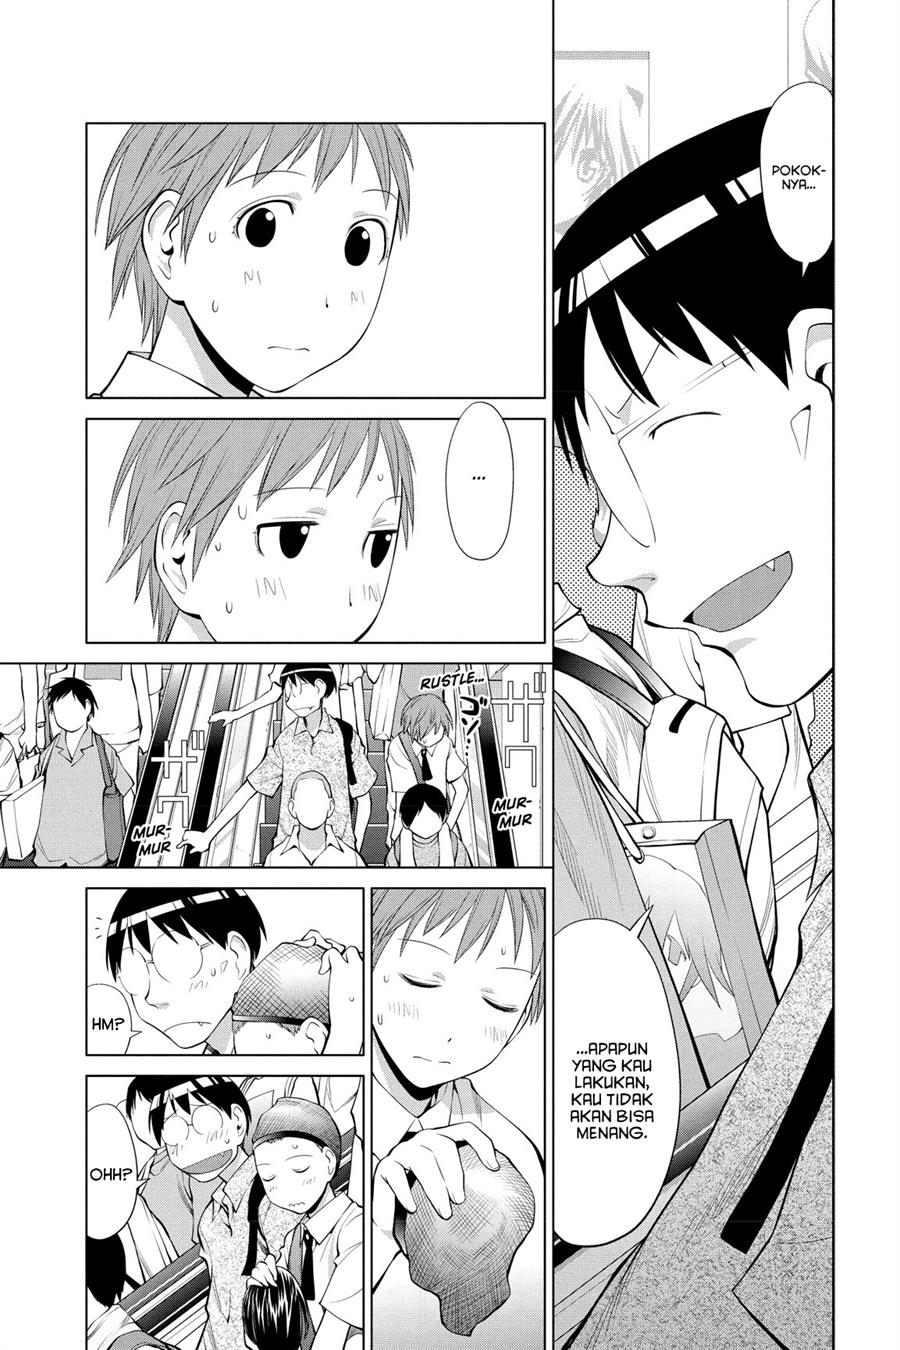 Genshiken – The Society for the Study of Modern Visual Culture Chapter 66 Image 5